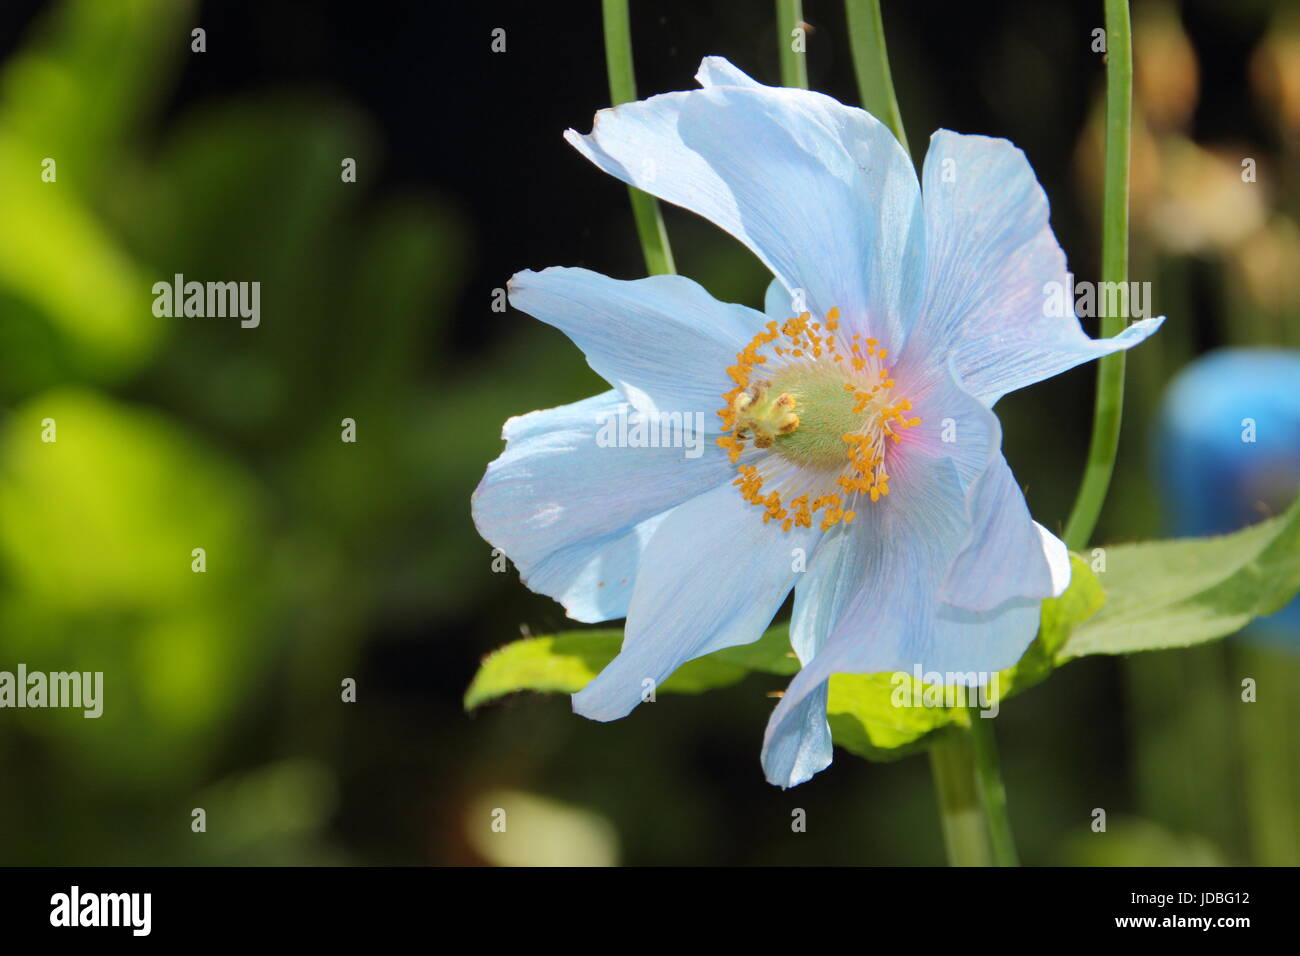 Himalayan Blue Poppy (Meconopsis 'Baileyi' variety), flowering in a shady spot in an English garden in June, UK Stock Photo